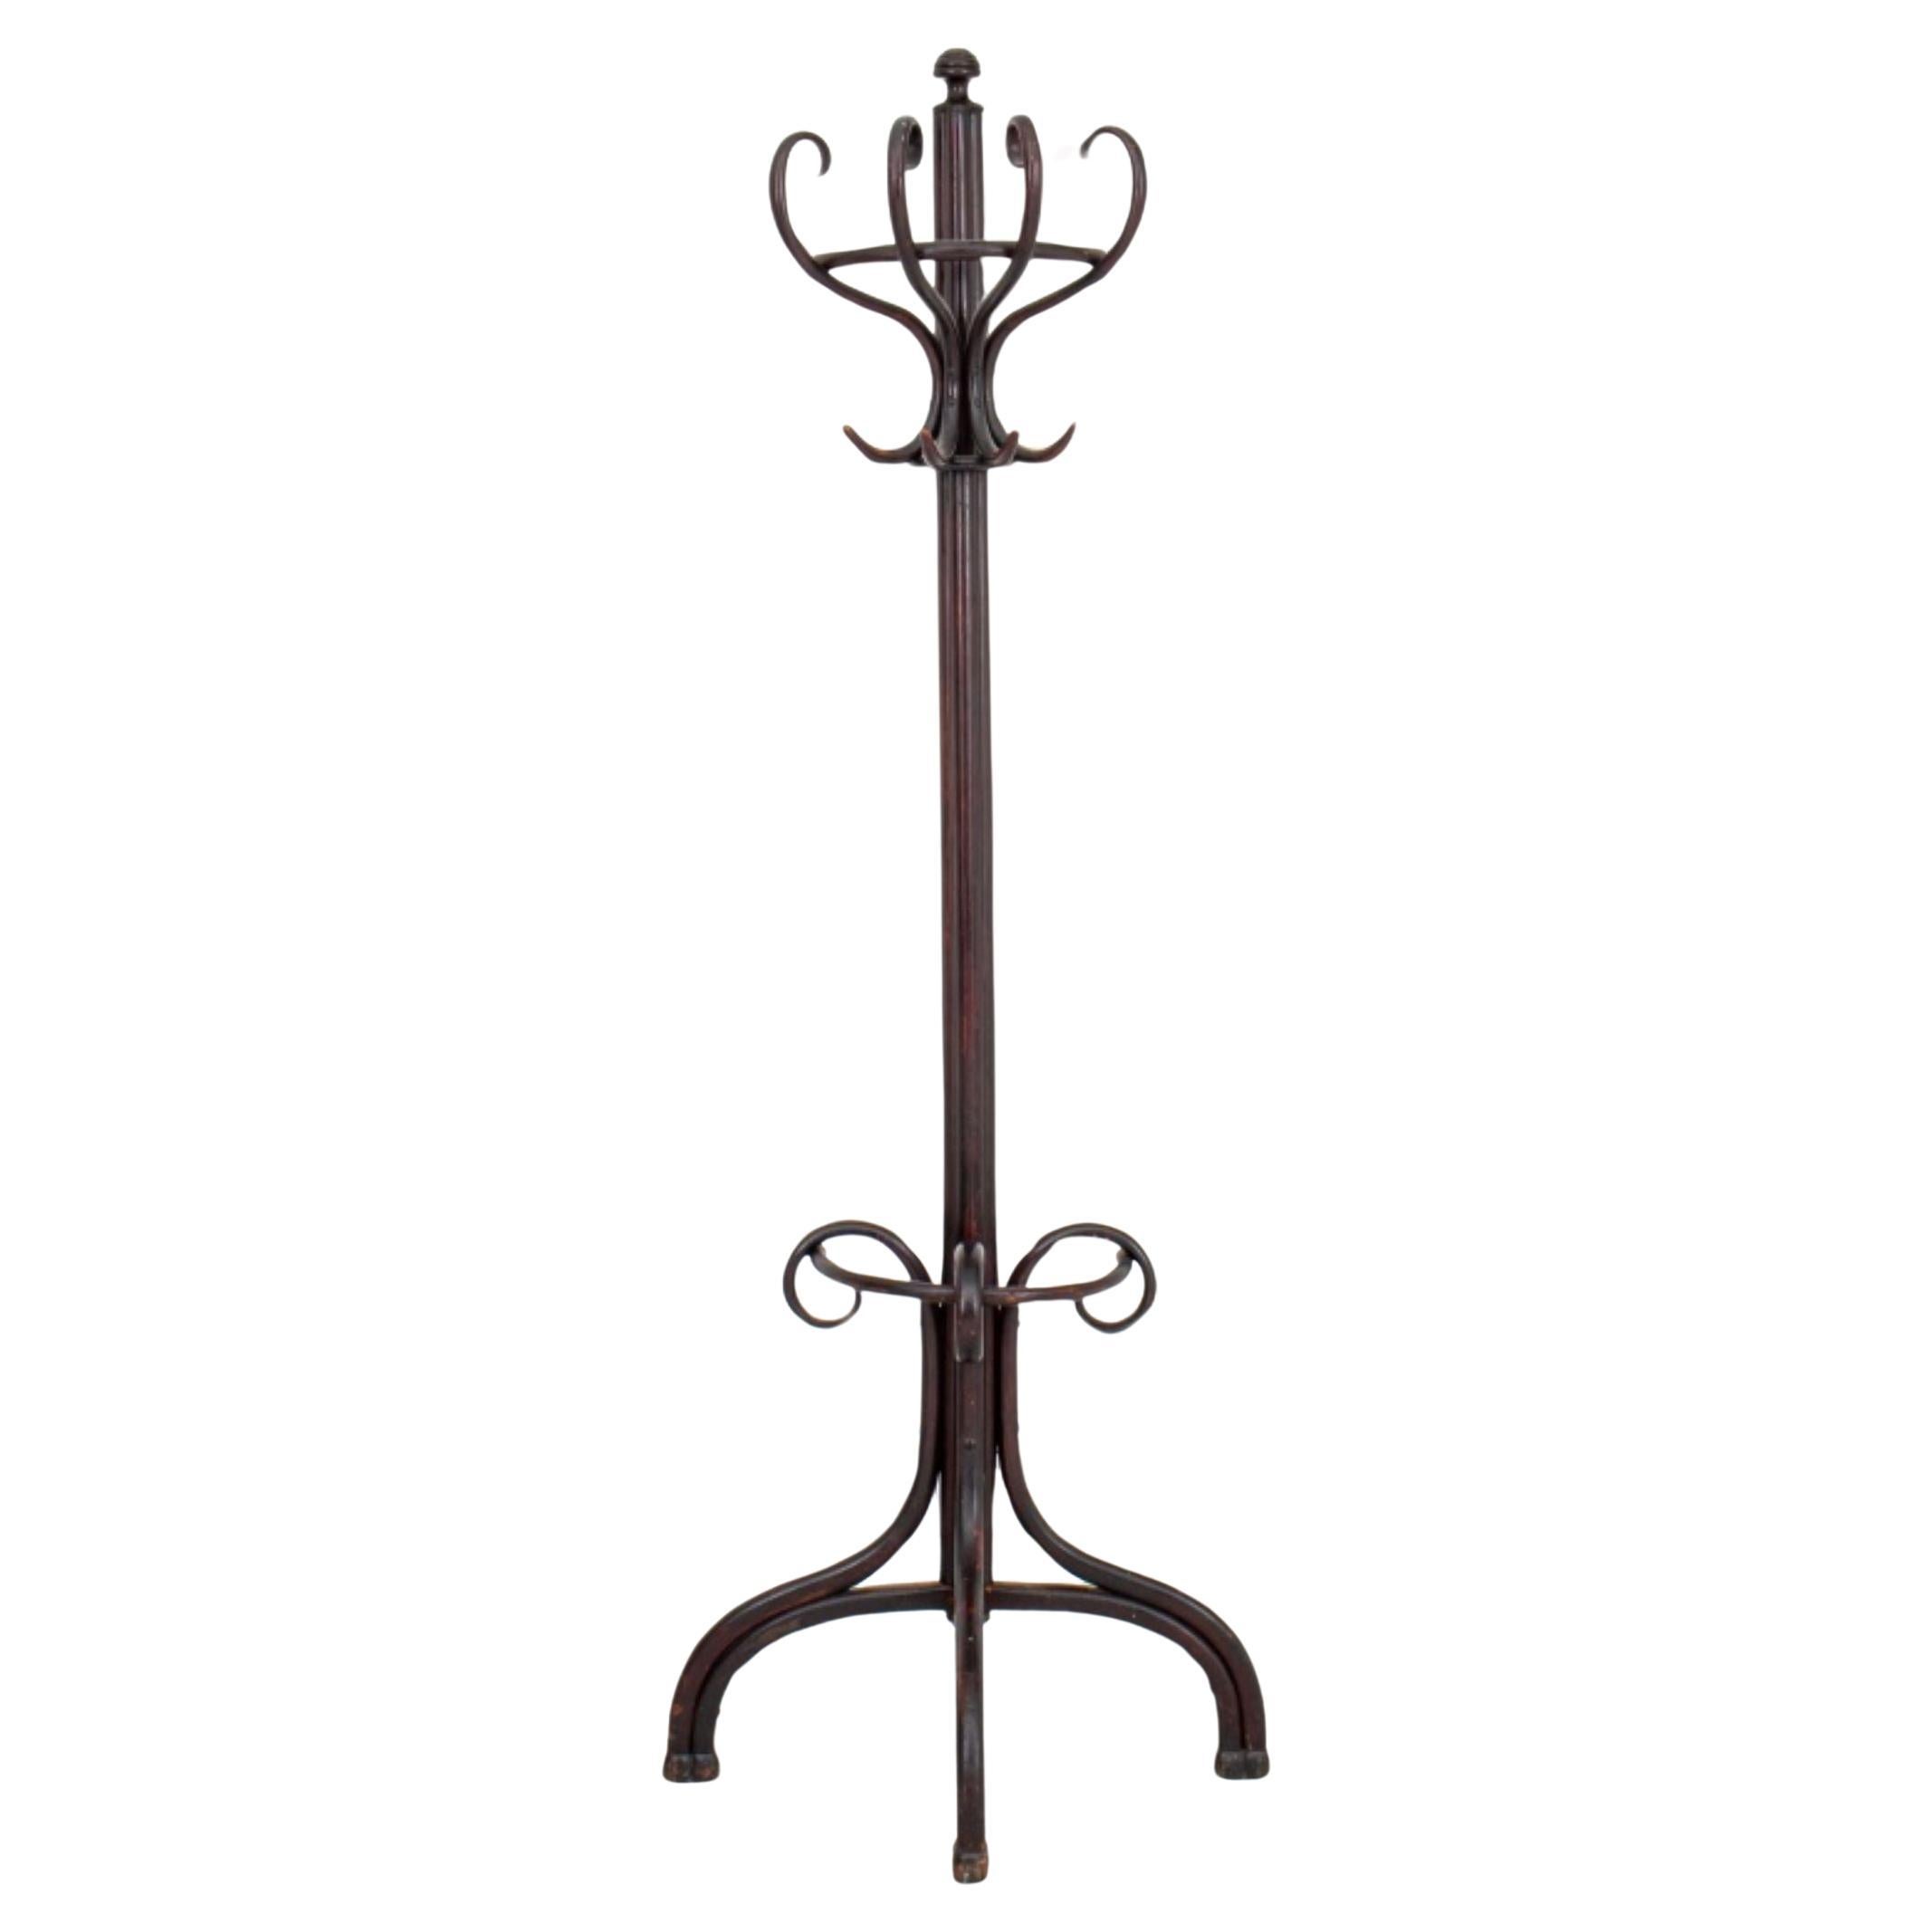 Thonet Bentwood Hall Coat Rack For Sale